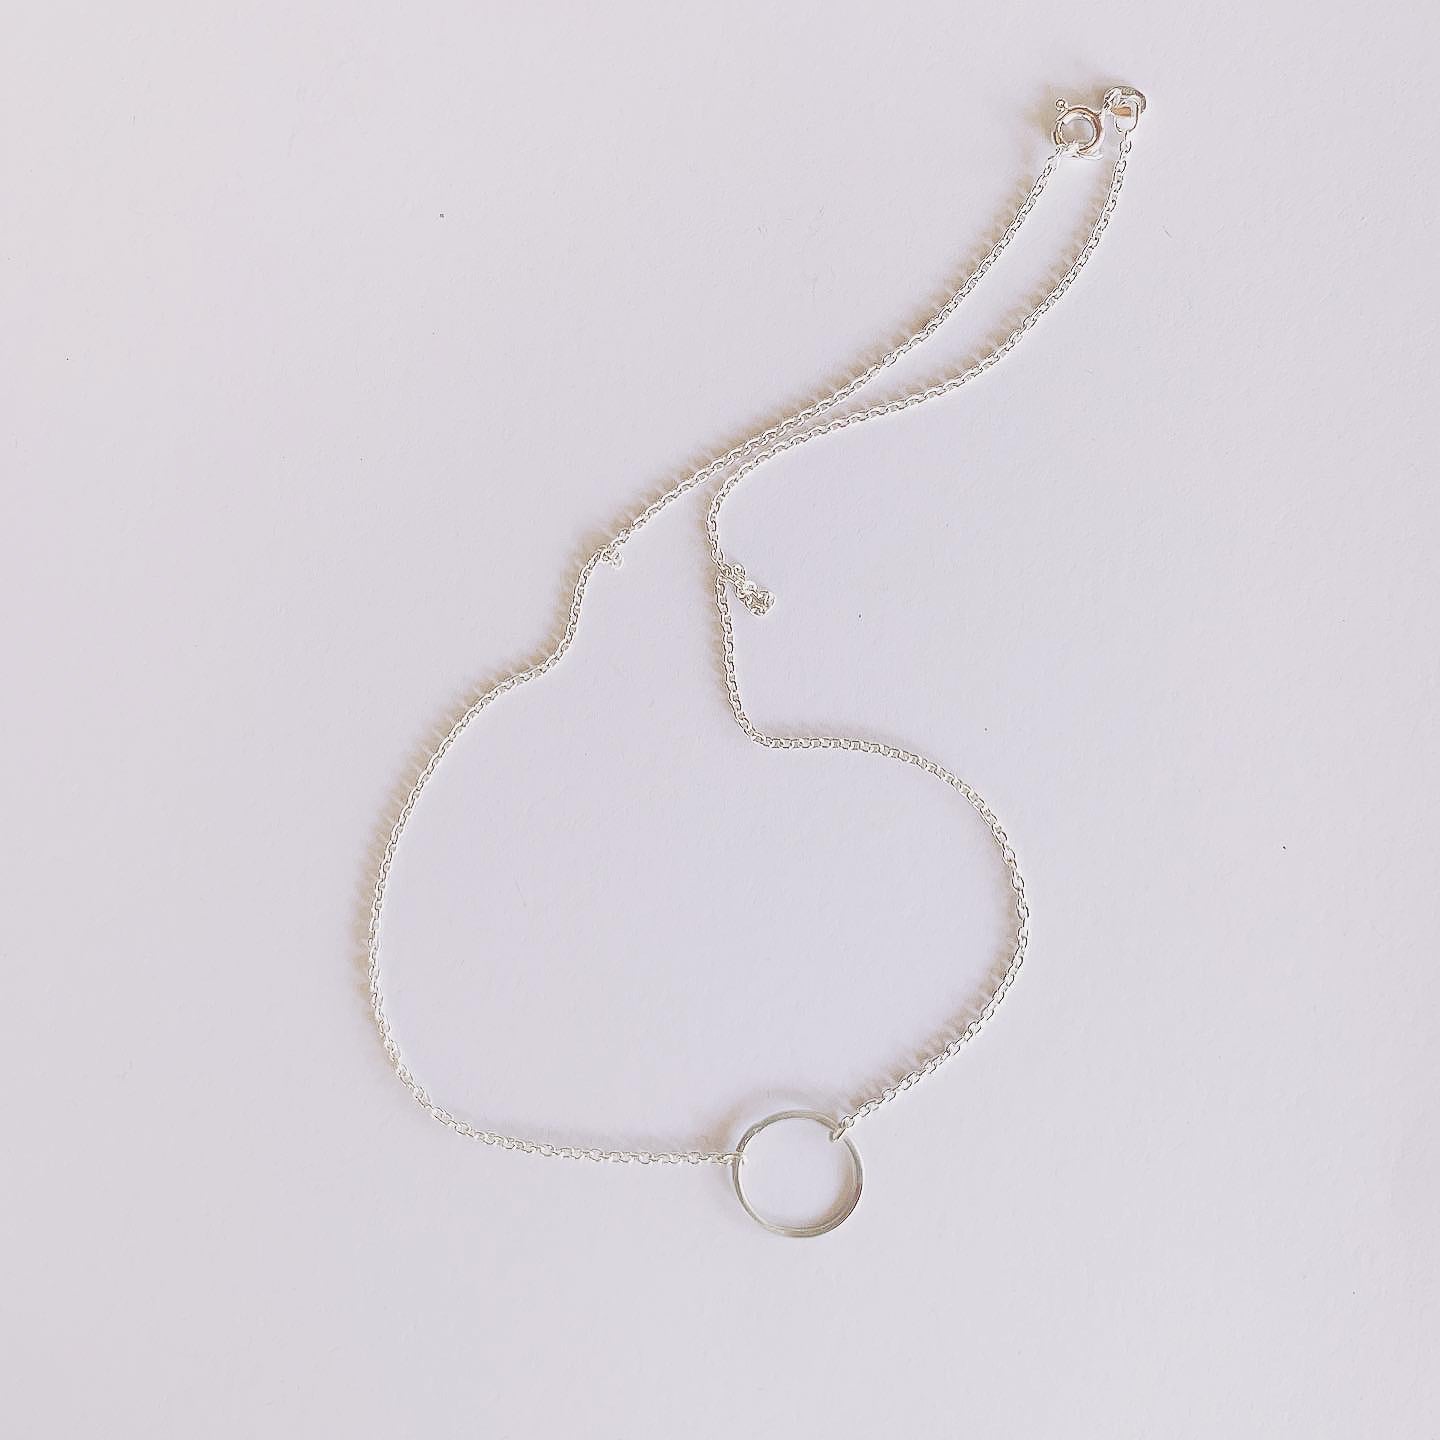 Ananta Ring Pendant on a Sterling Silver Chain